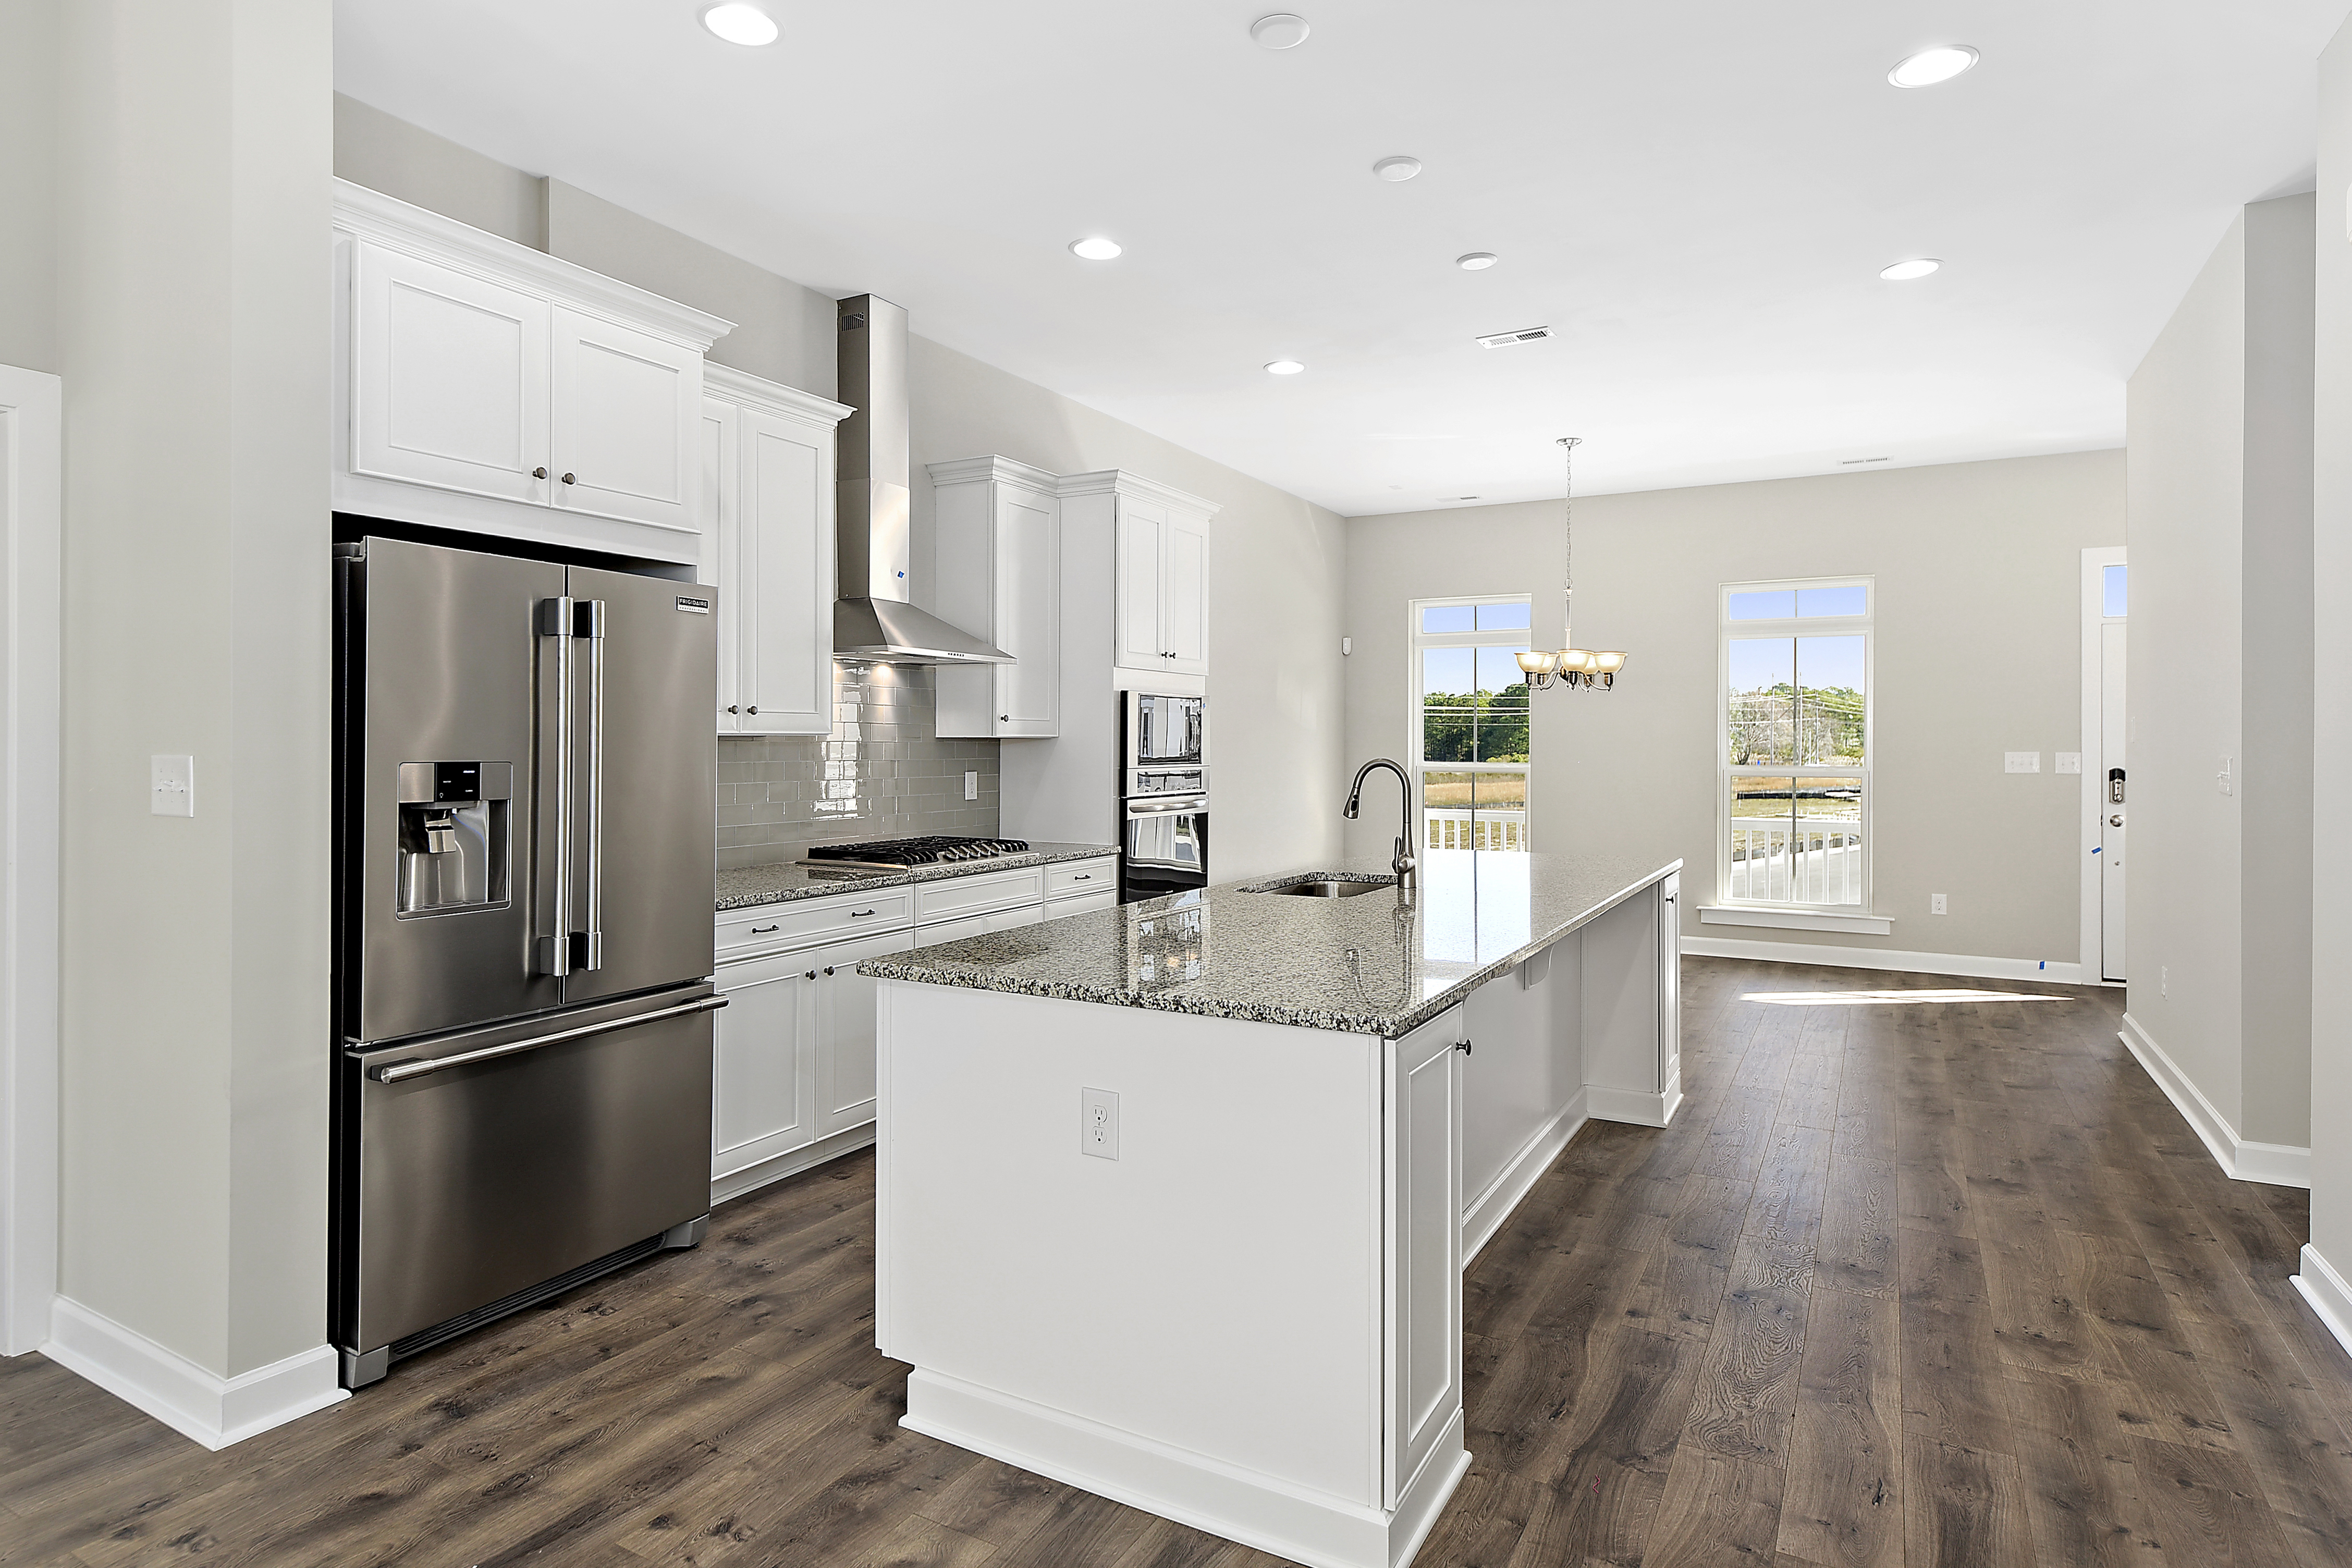 Spacious kitchen with large white center island and stainless steel appliances